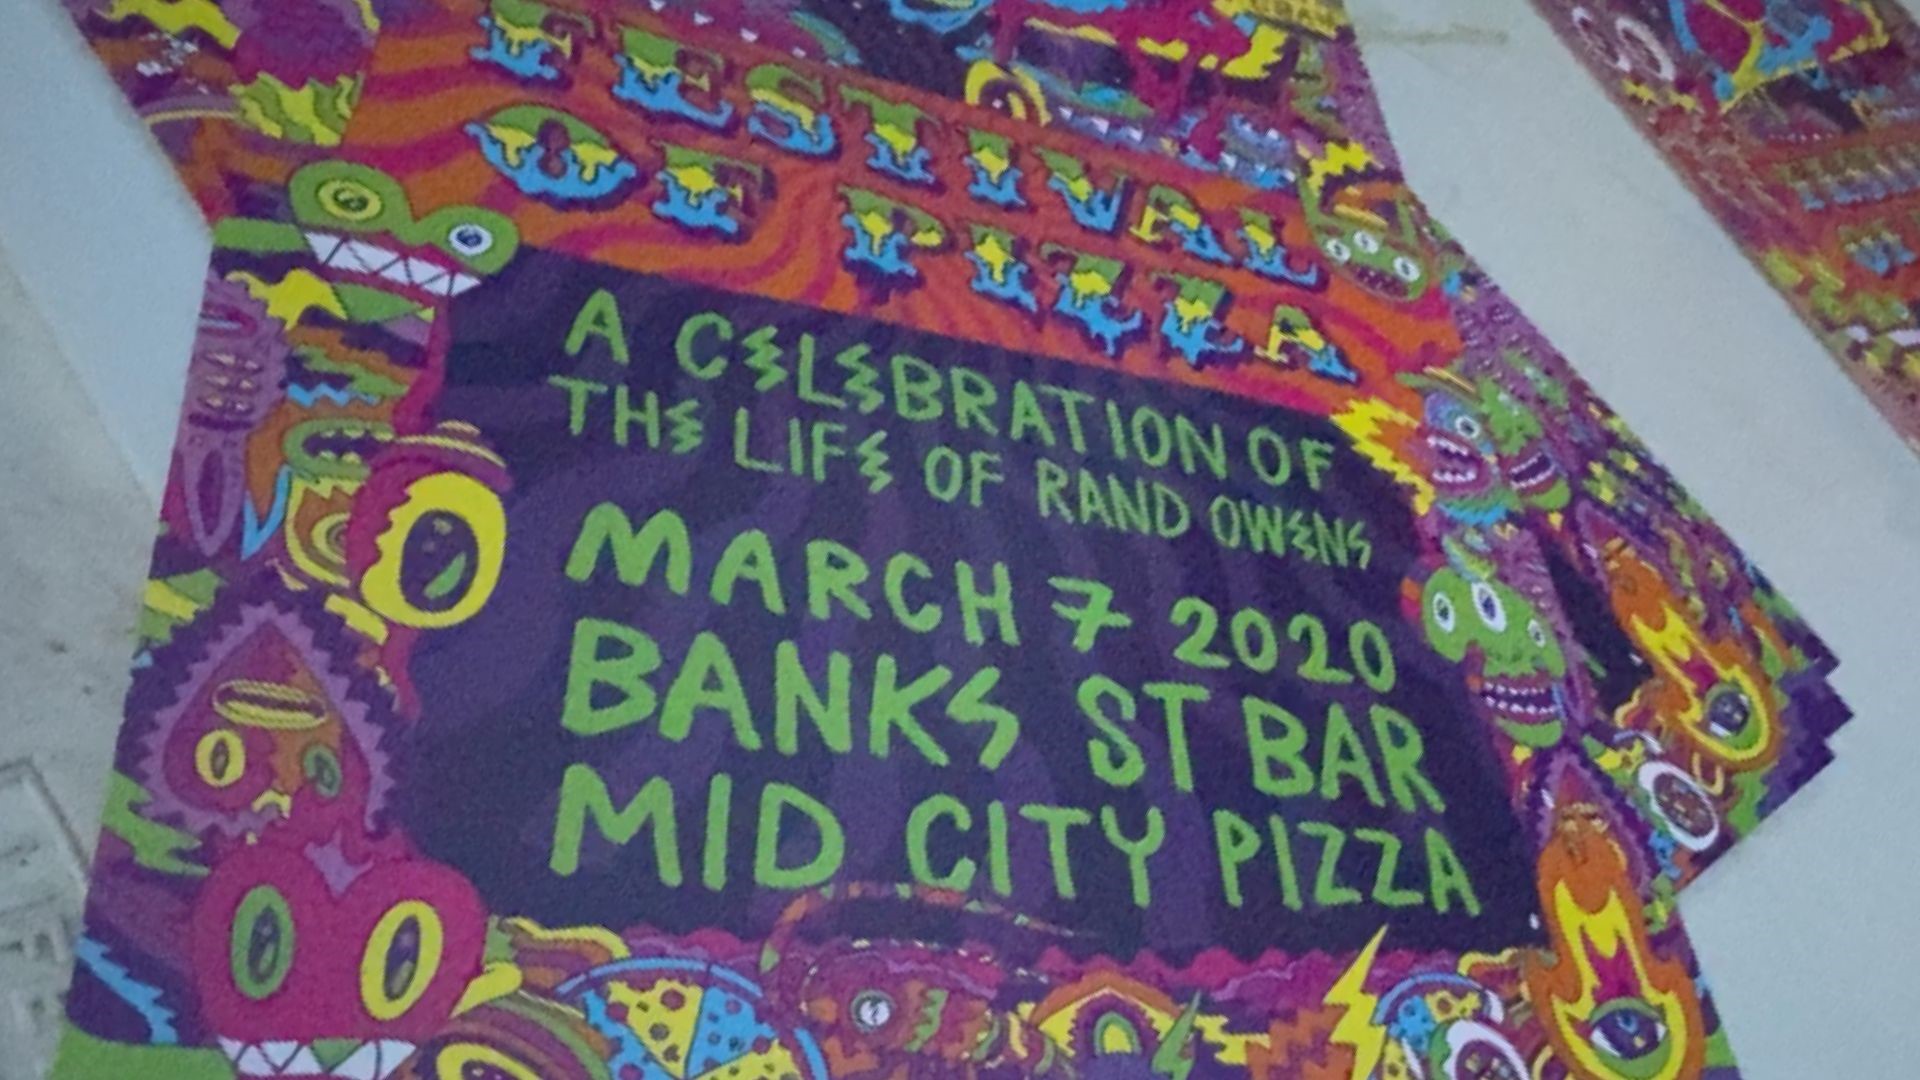 Friends at the Pizza Fest planned in Rand's honor said Owens was funny and had an outgoing personality.